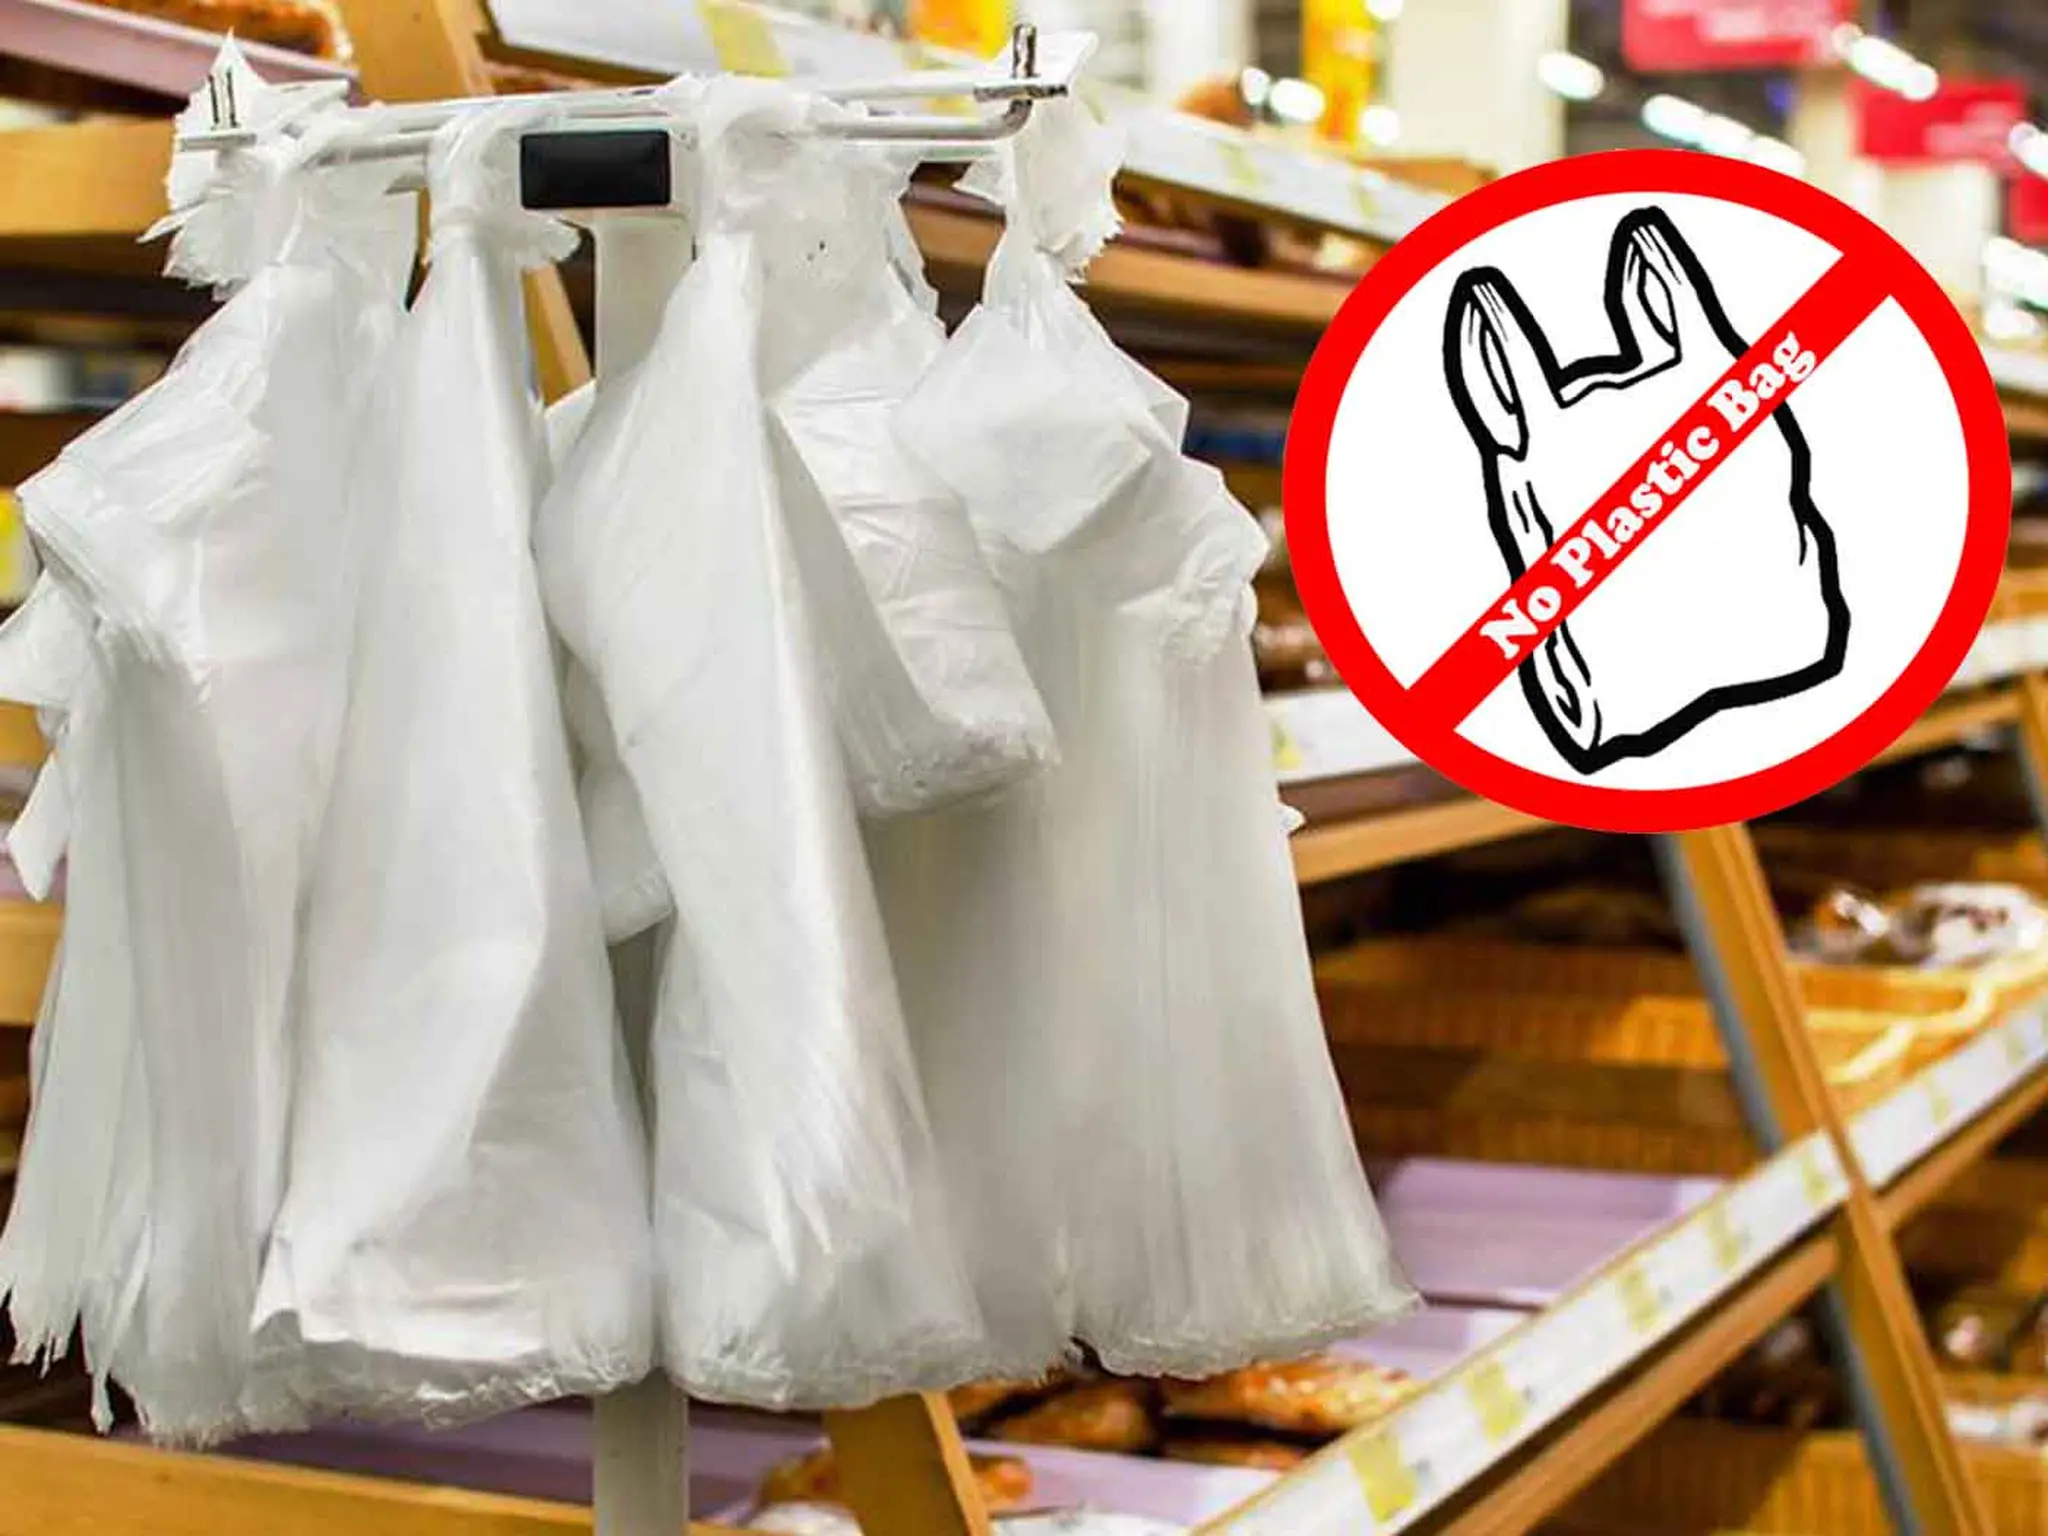 Plastic shopping bags banned in the UAE starting new year